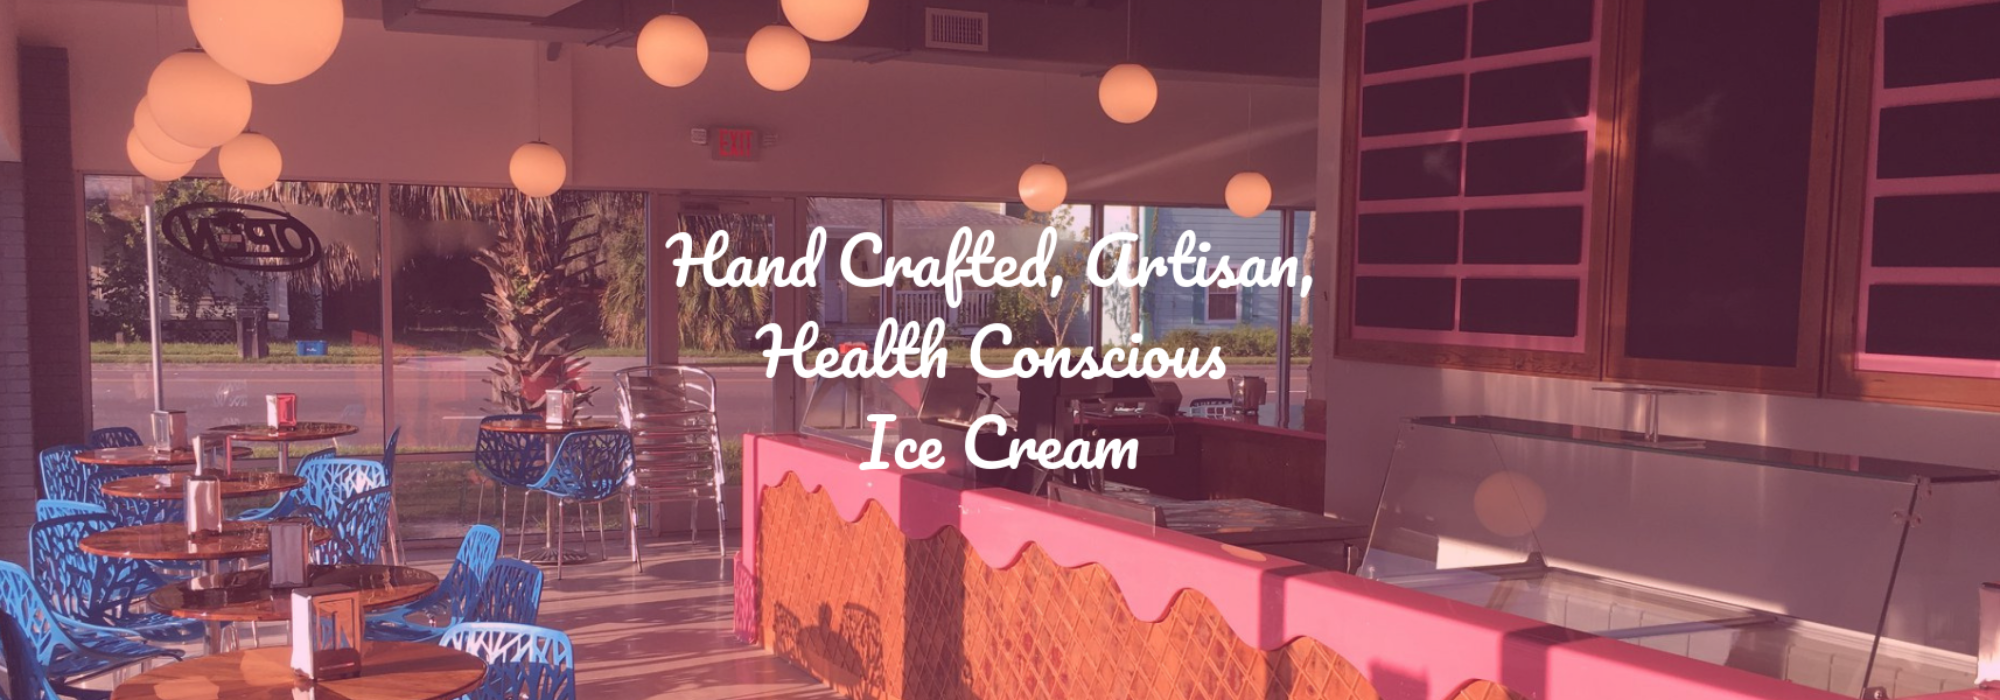 http://hoggetownecreamery.com/wp-content/uploads/2019/08/Hand-Crafted-Artisan-Health-Conscious-Ice-Cream-2000x700.png